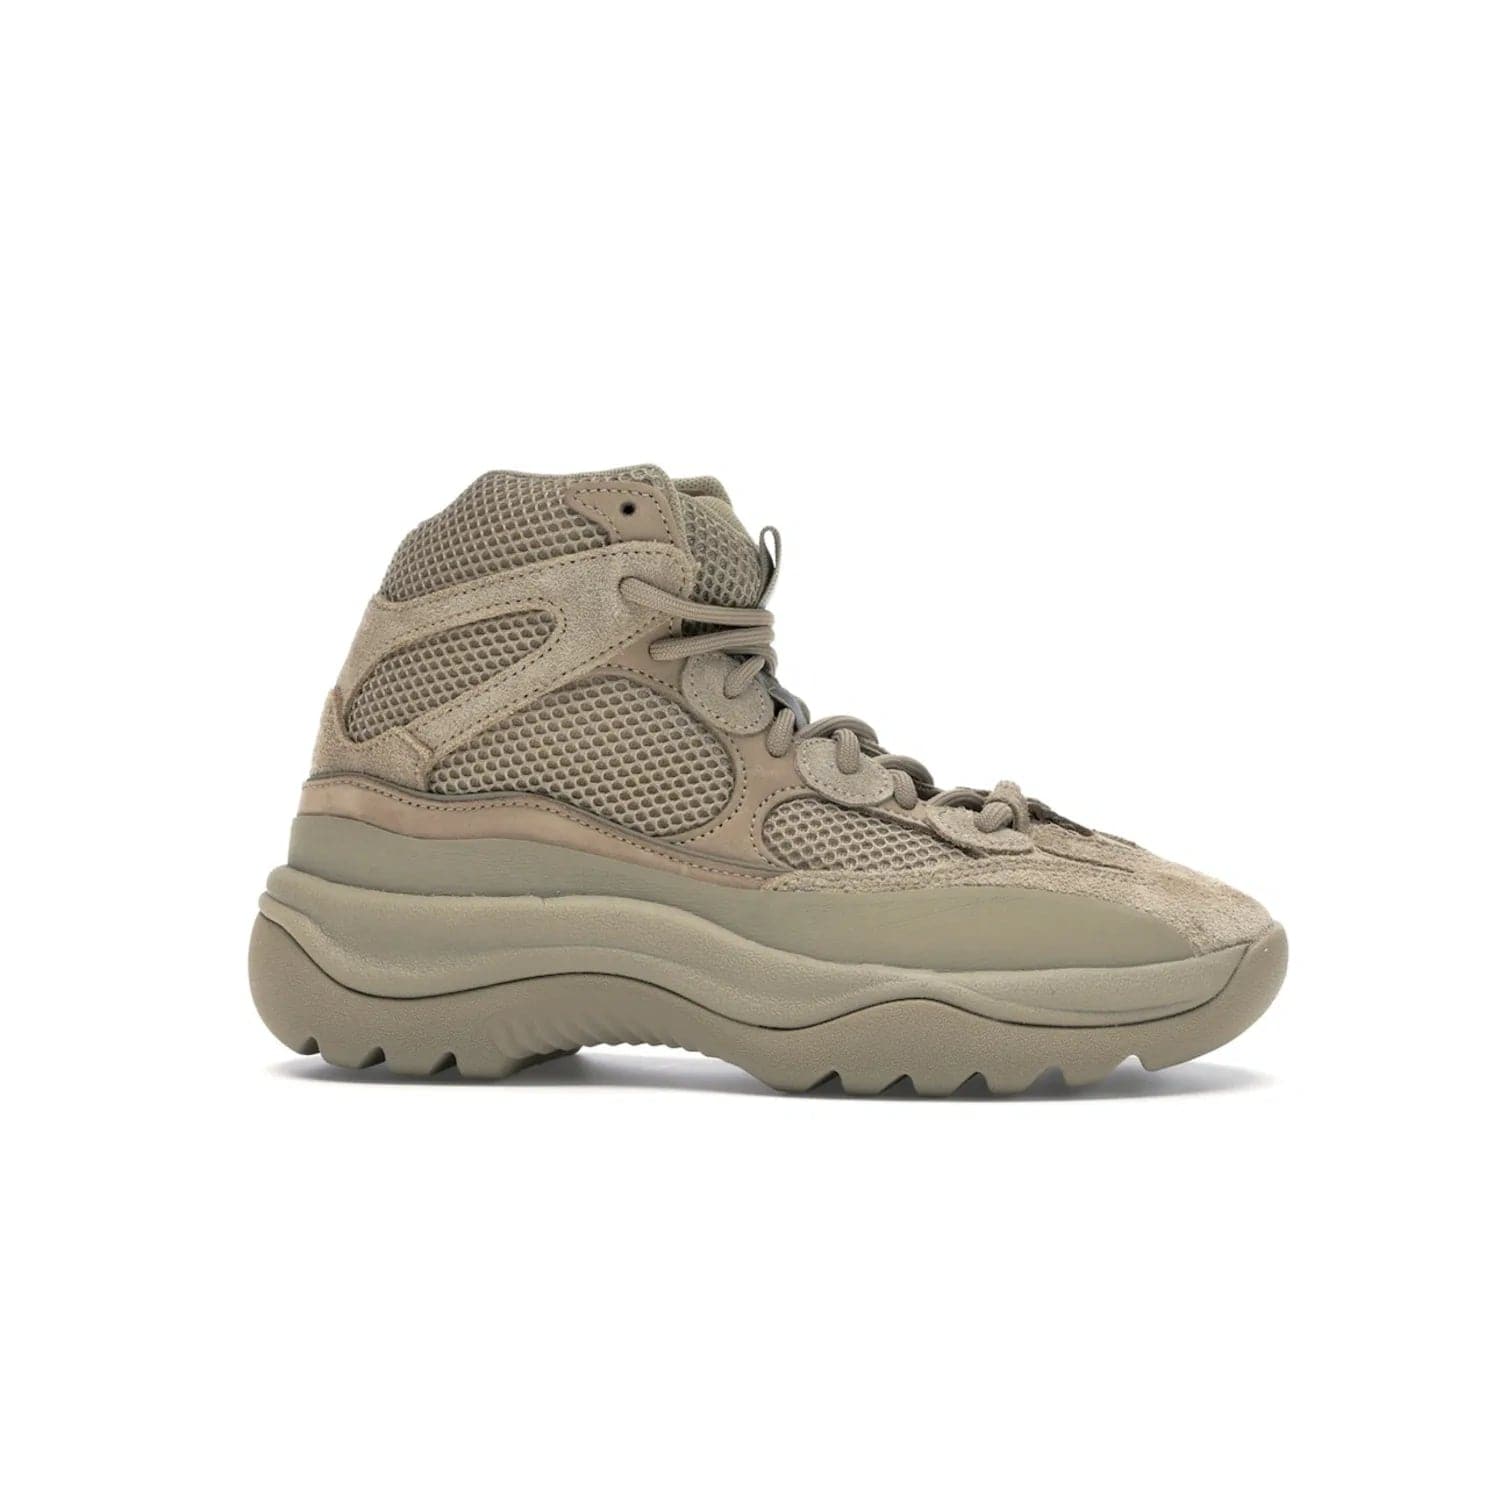 adidas Yeezy Desert Boot Rock - Image 2 - Only at www.BallersClubKickz.com - #
This season, make a fashion statement with the adidas Yeezy Desert Boot Rock. Nubuck and suede upper offers tonal style while the grooved sole provides traction and stability. Get yours in April 2019.